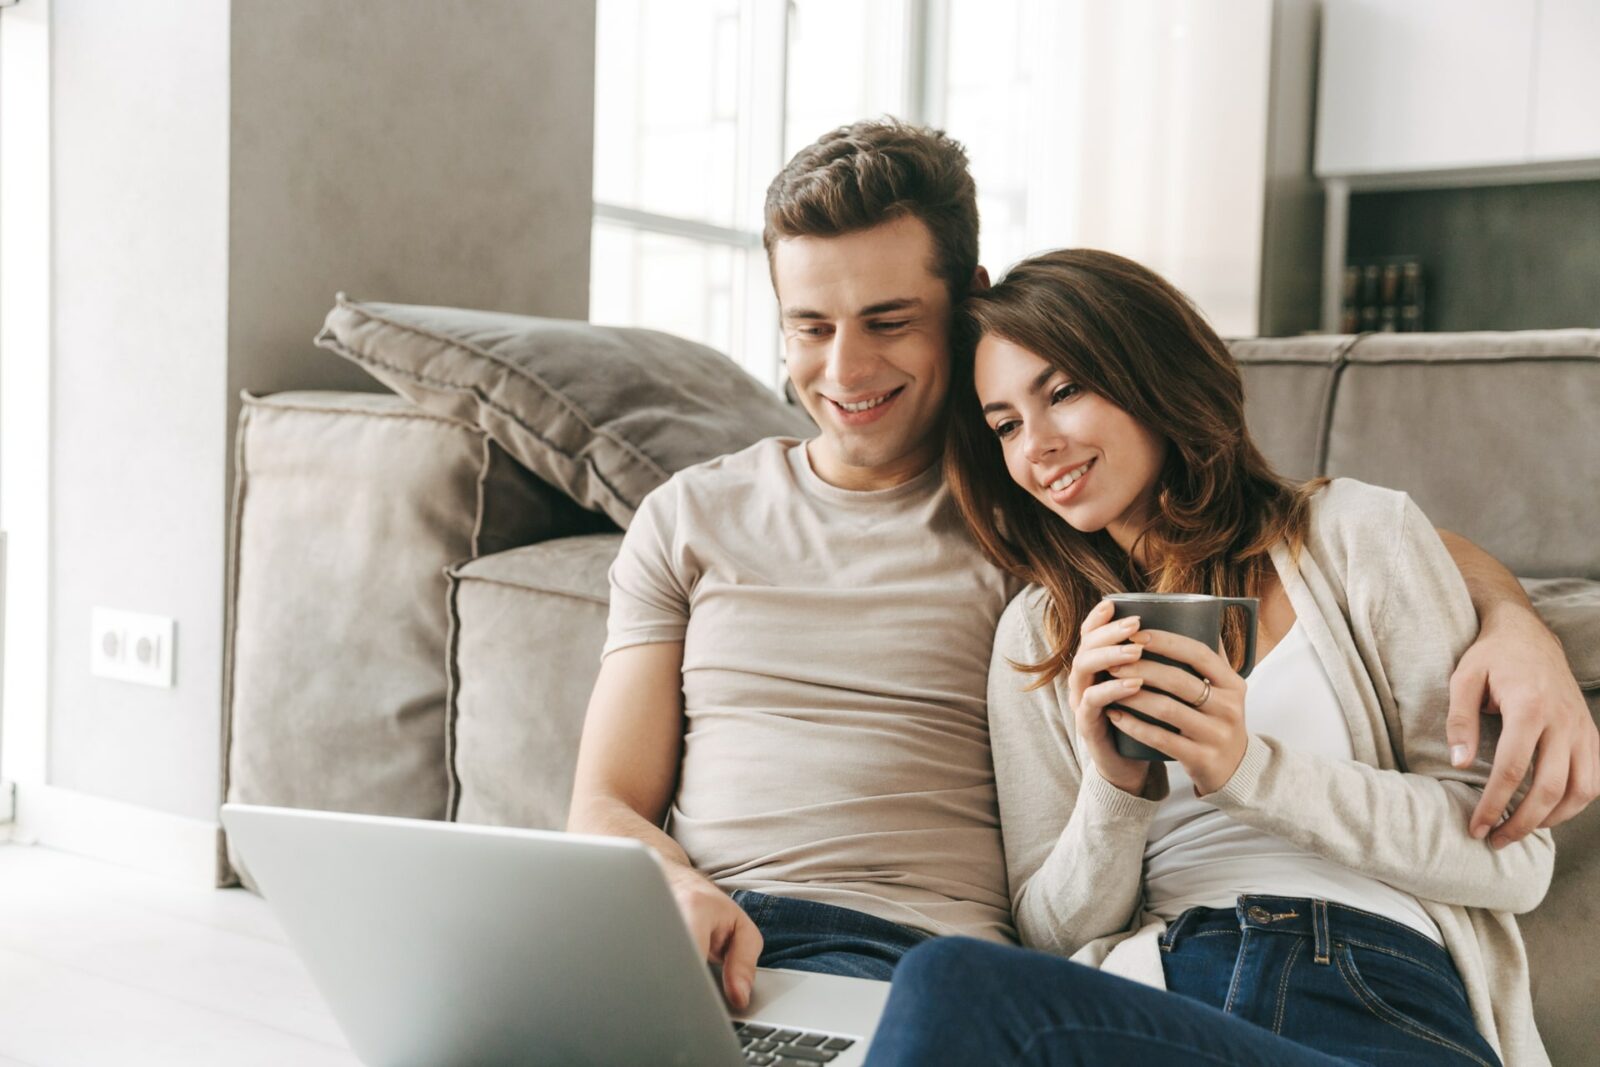 Smiling young couple relaxing on a couch using laptop